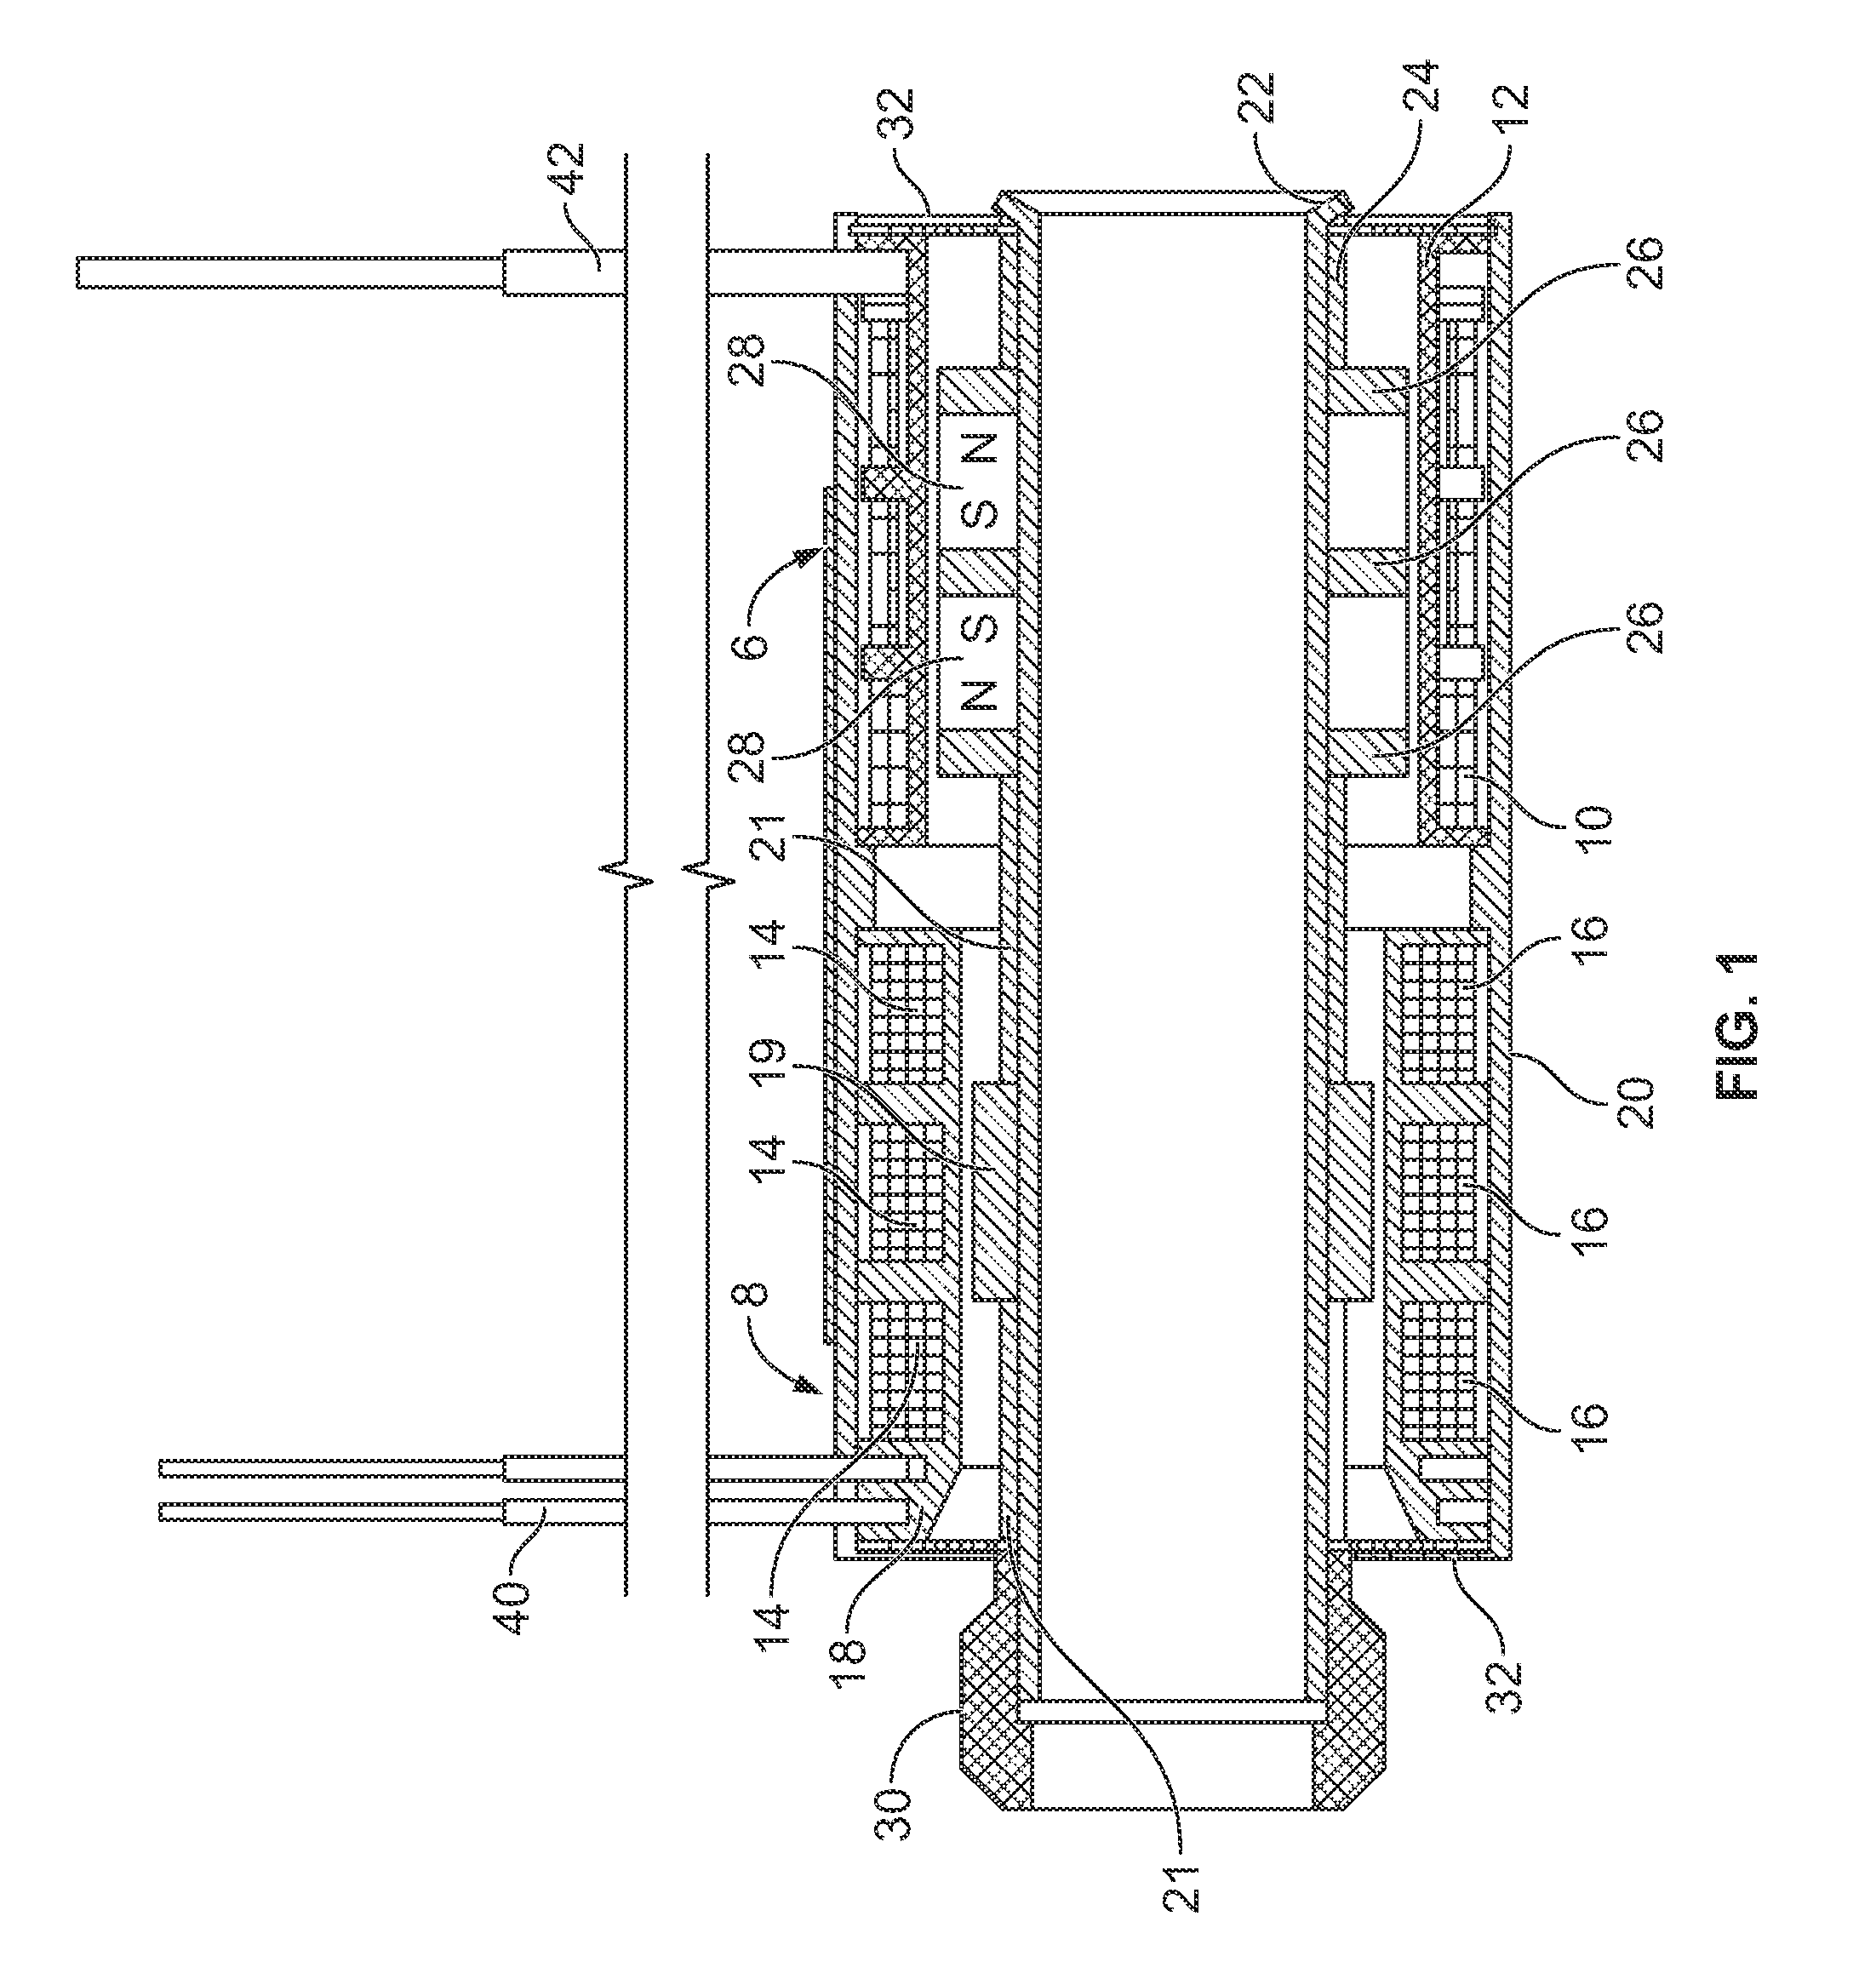 Voice coil actuator with integrated LVDT